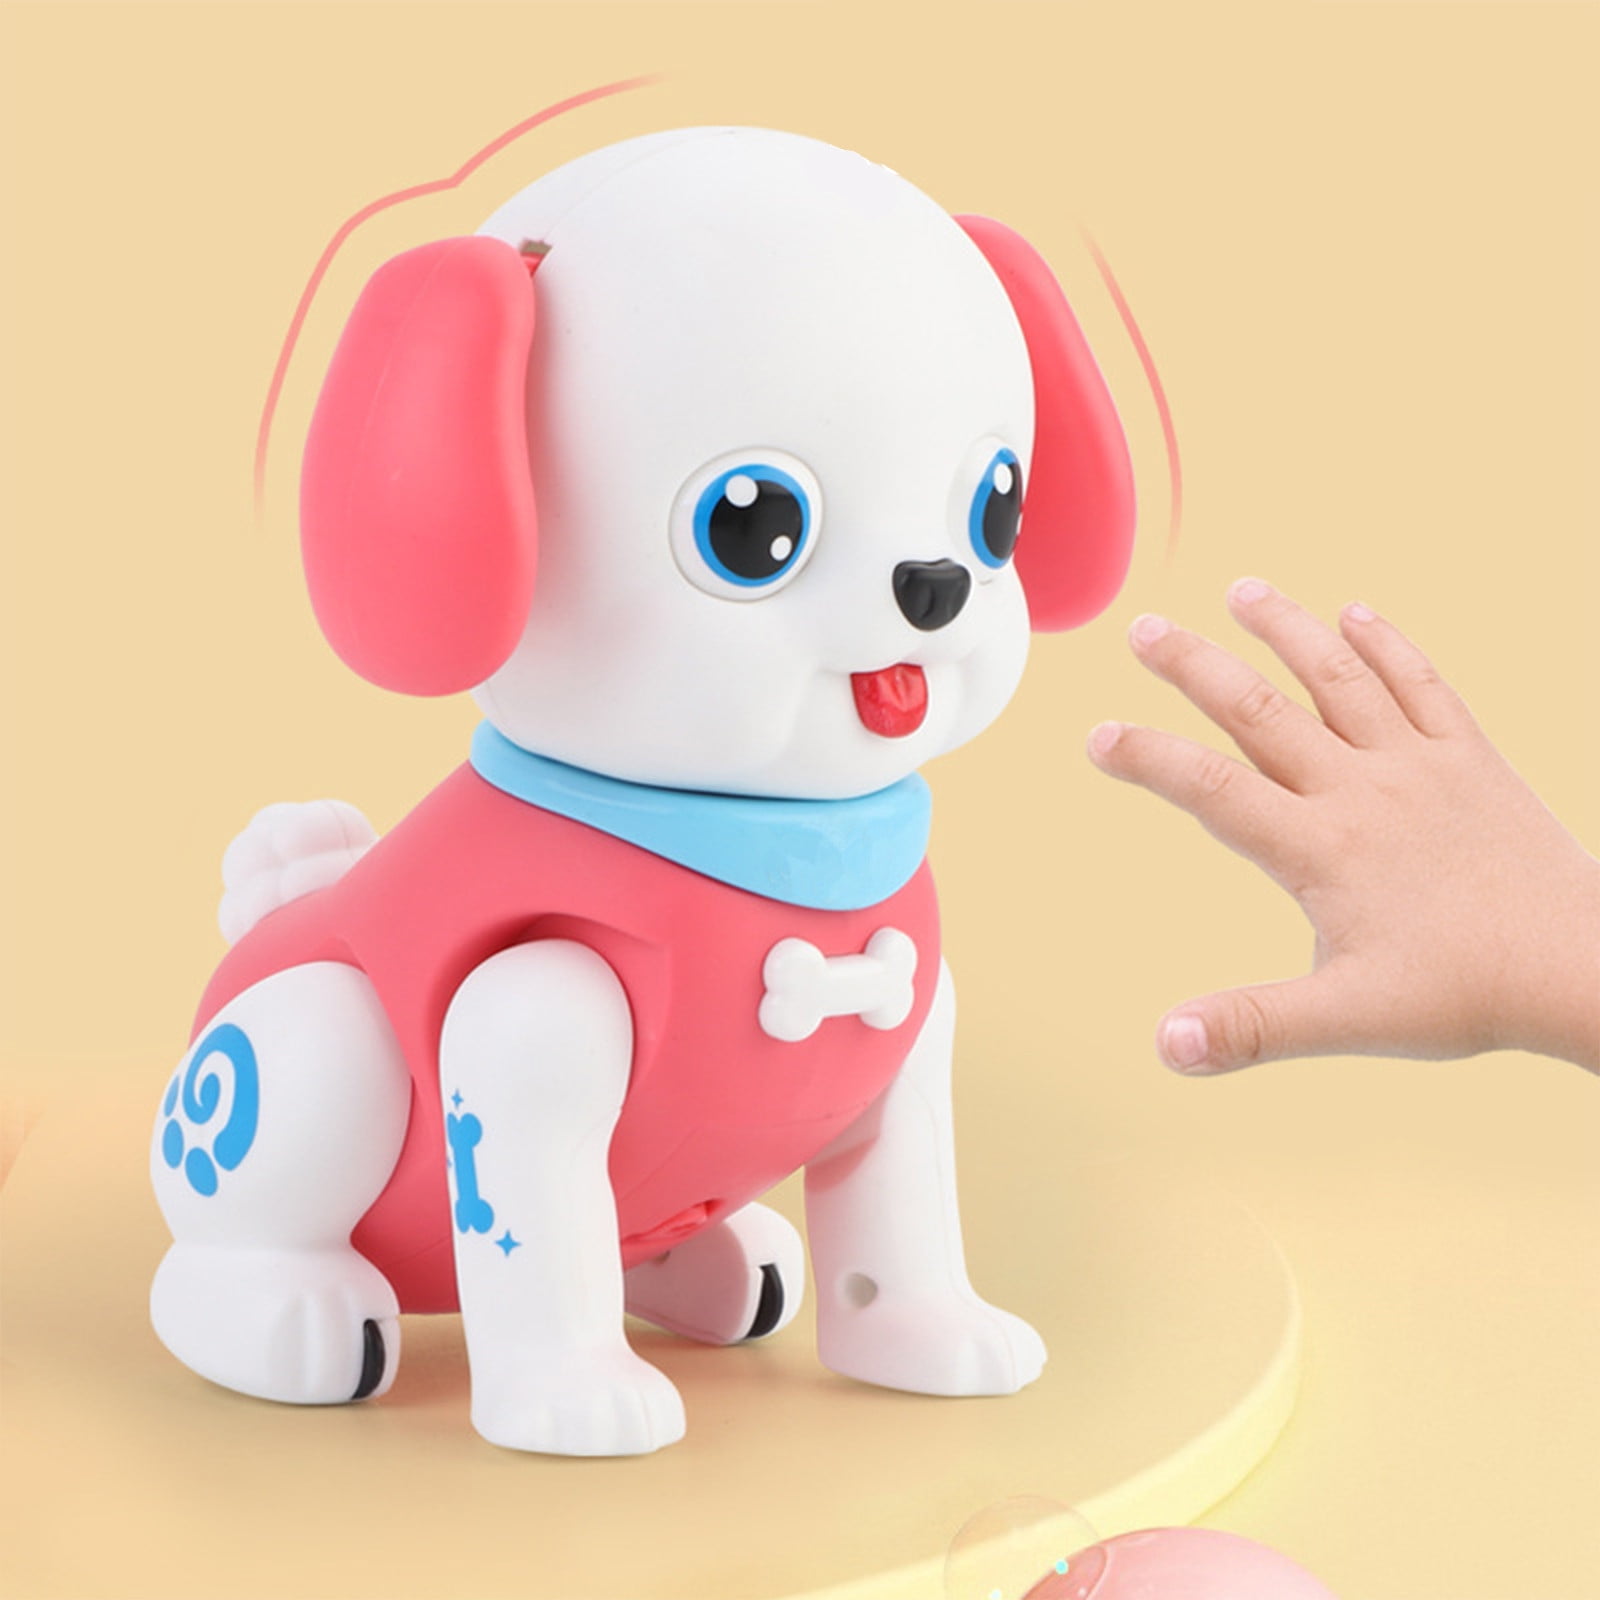 Slopehill Interactive Puppy - Smart Pet, Sing, Dance, and Spin Electronic Puppy Dog Toys for Age 3 4 5 6 7 8 Year Old Girls, Gifts Idea for Kids, Size: 13